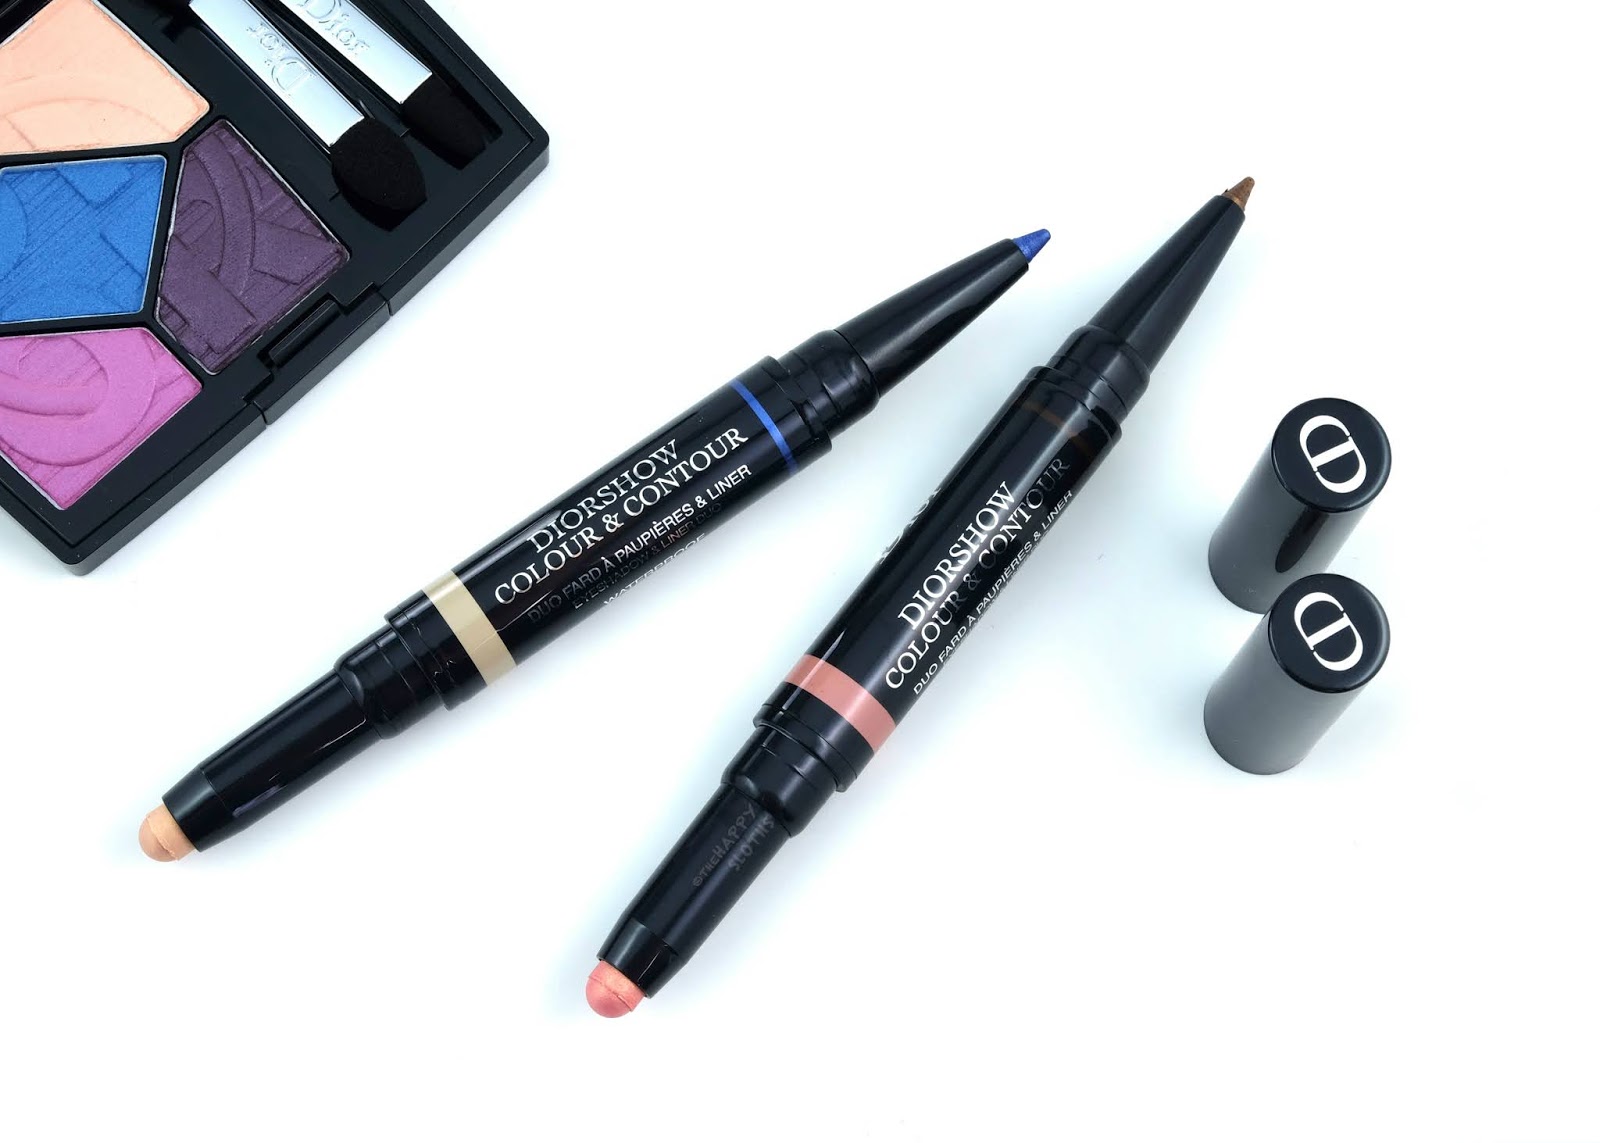 Dior Summer 2020 | Diorshow Colour & Contour Eyeshadow & Liner Duo: Review and Swatches